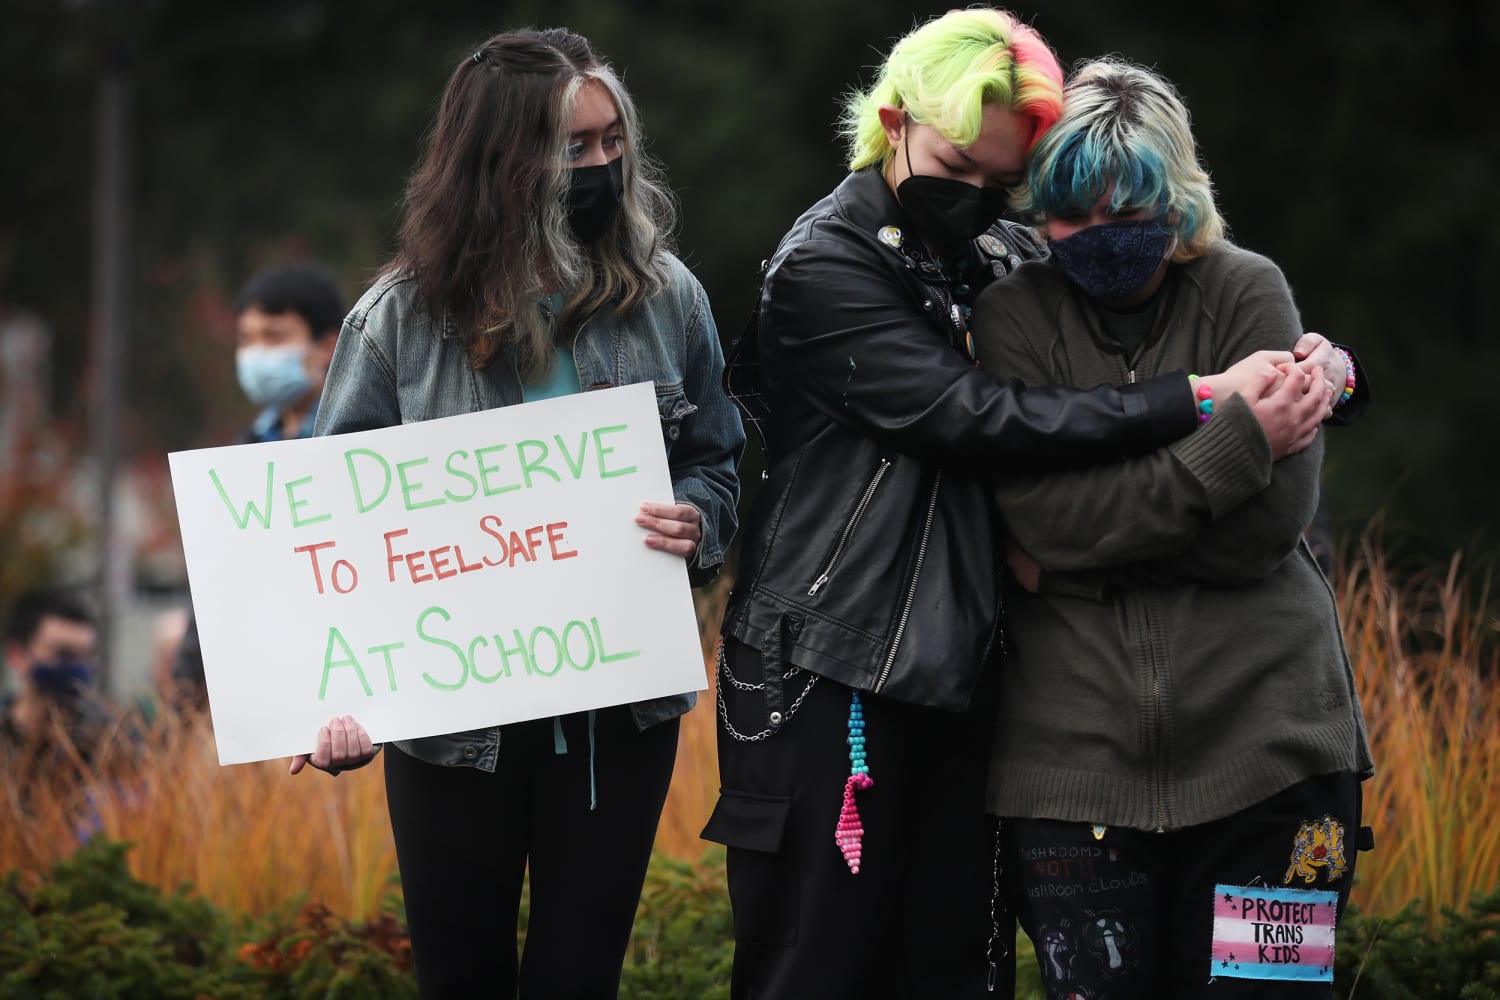 Students are walking out of school to protest districts’ handling of sexual assault allegations